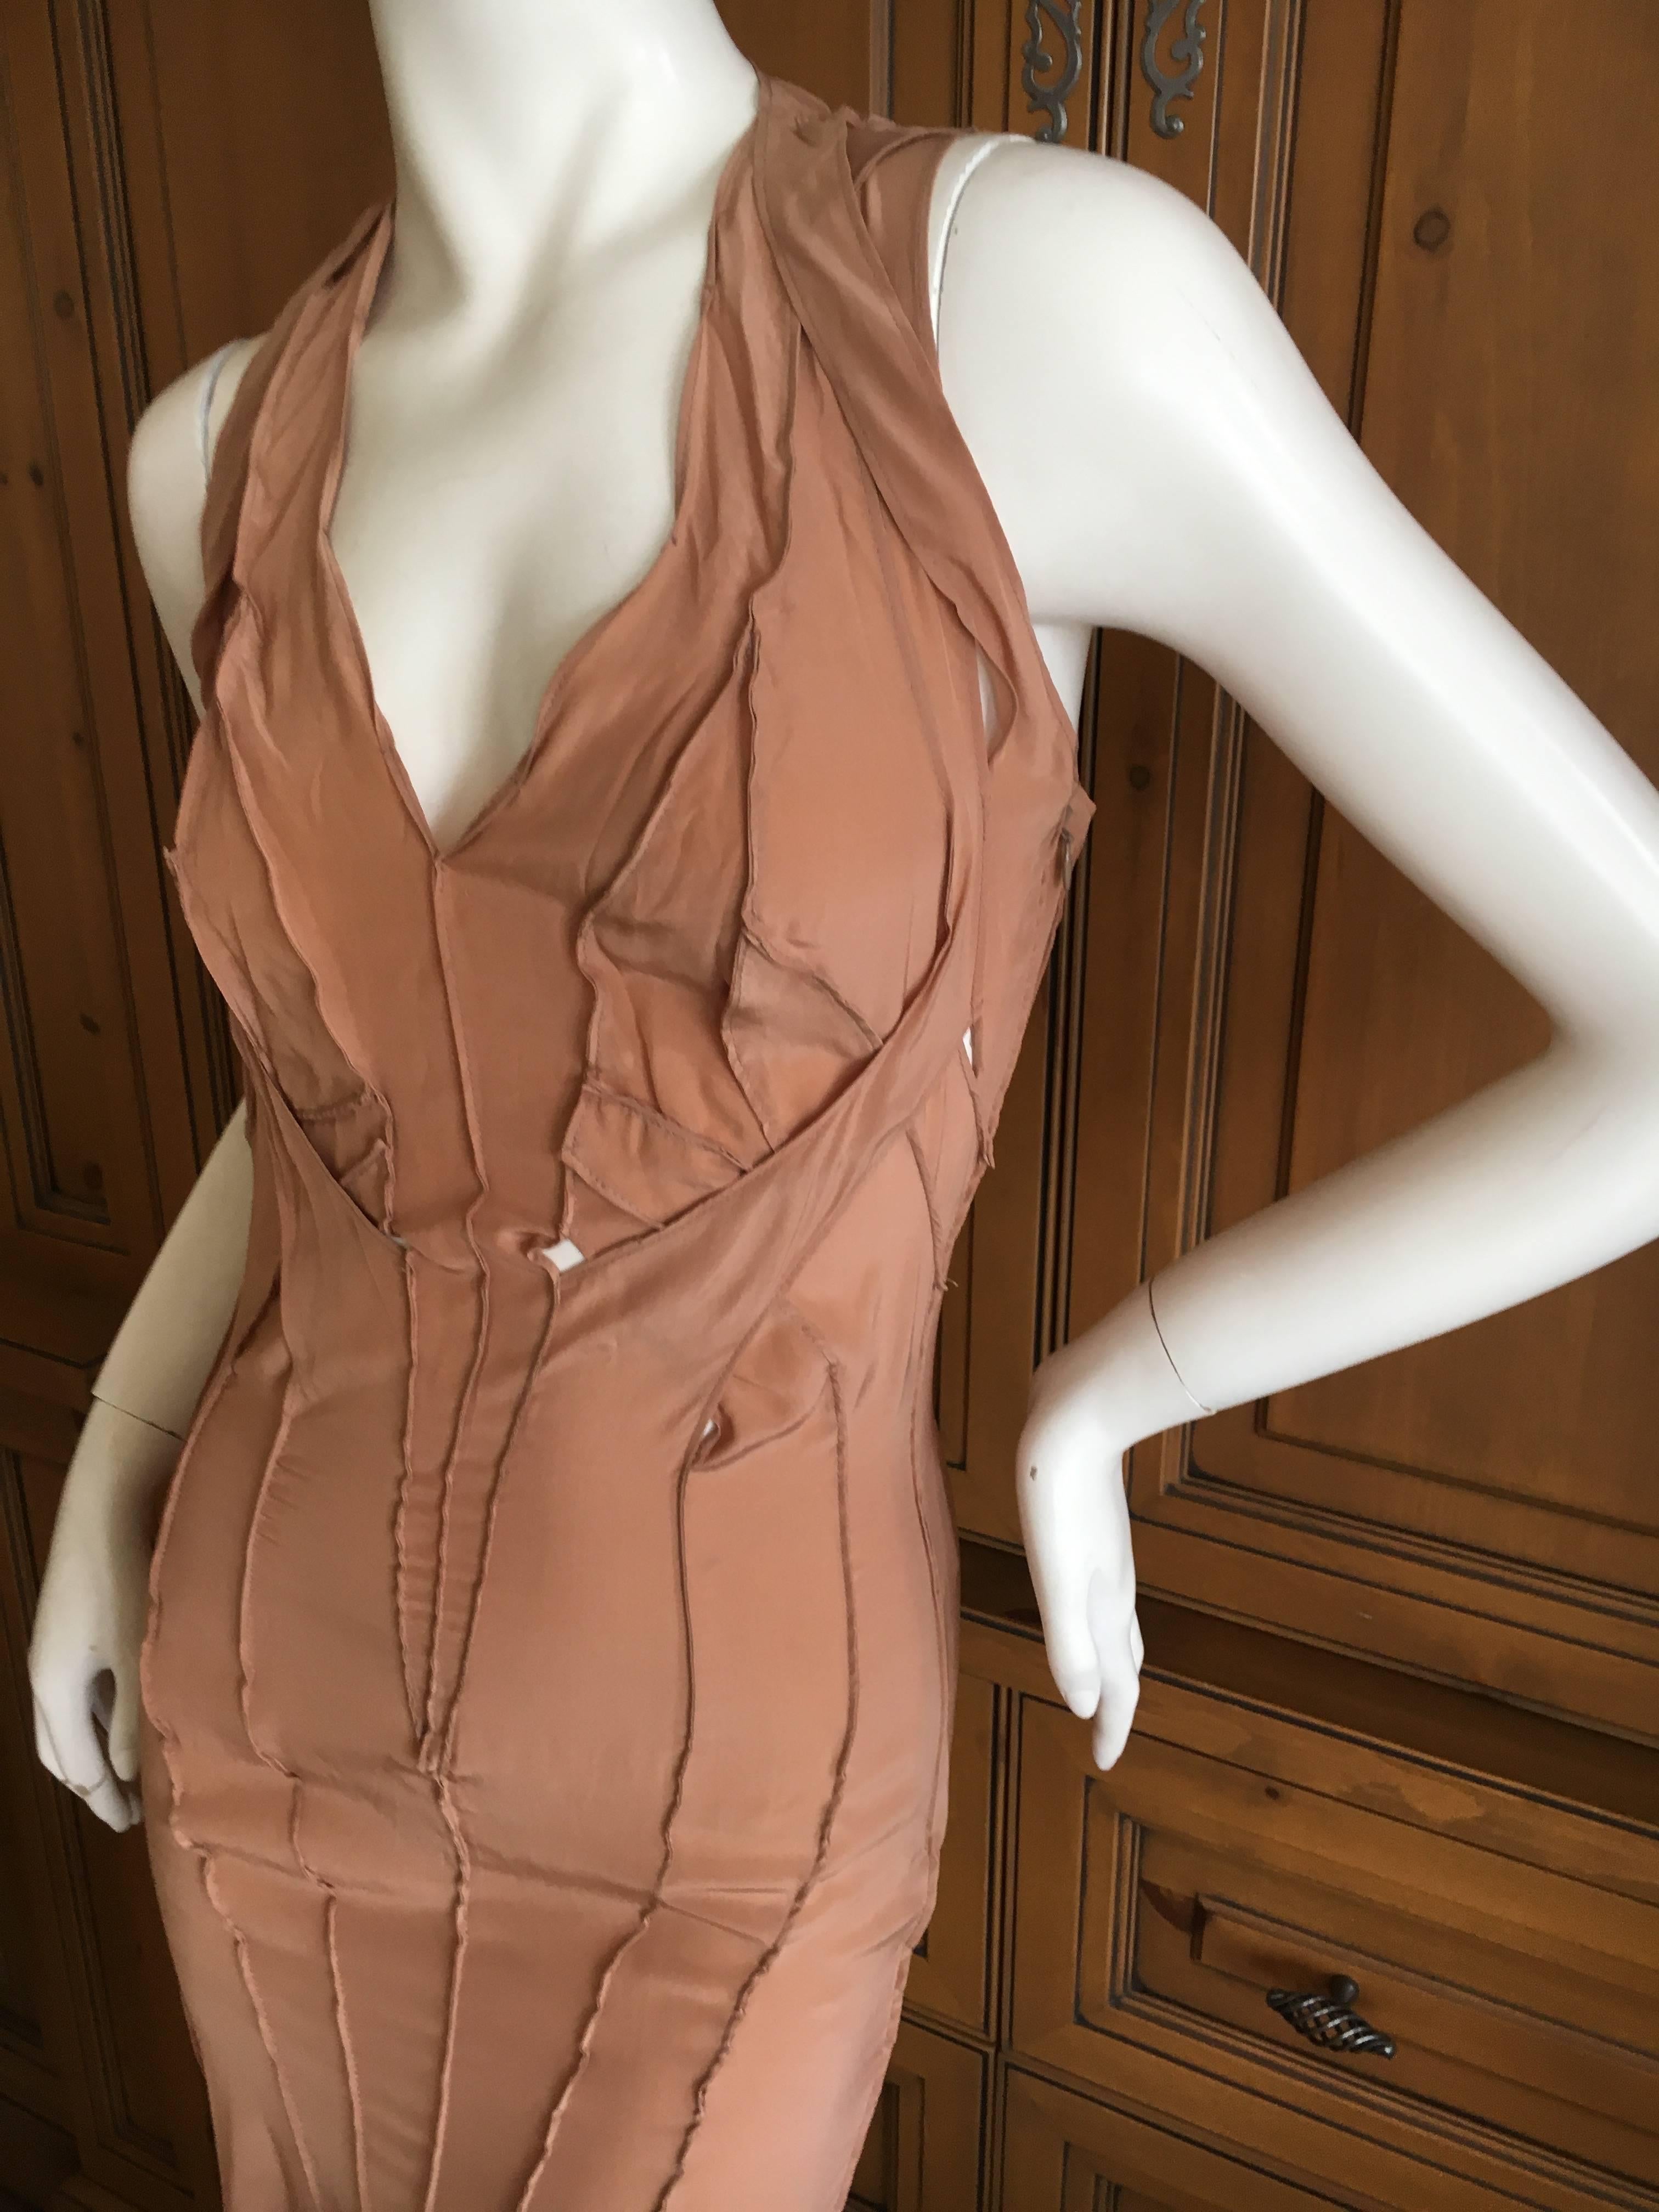 Women's Yves Saint Laurent by Tom Ford 2002 Silk Dress Size 36 For Sale